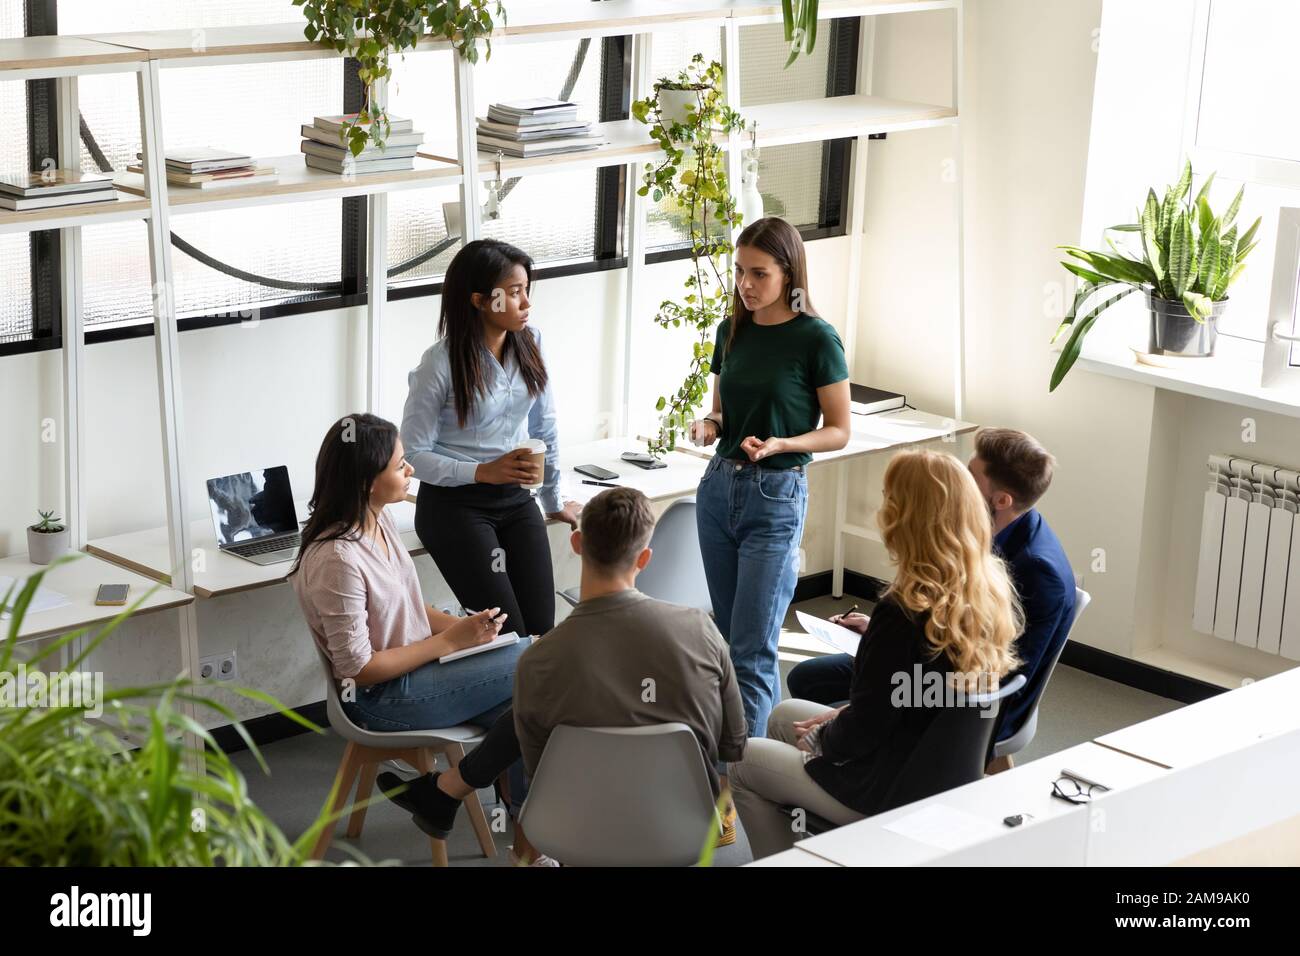 Concerned diverse office employees gather together solve business problems Stock Photo